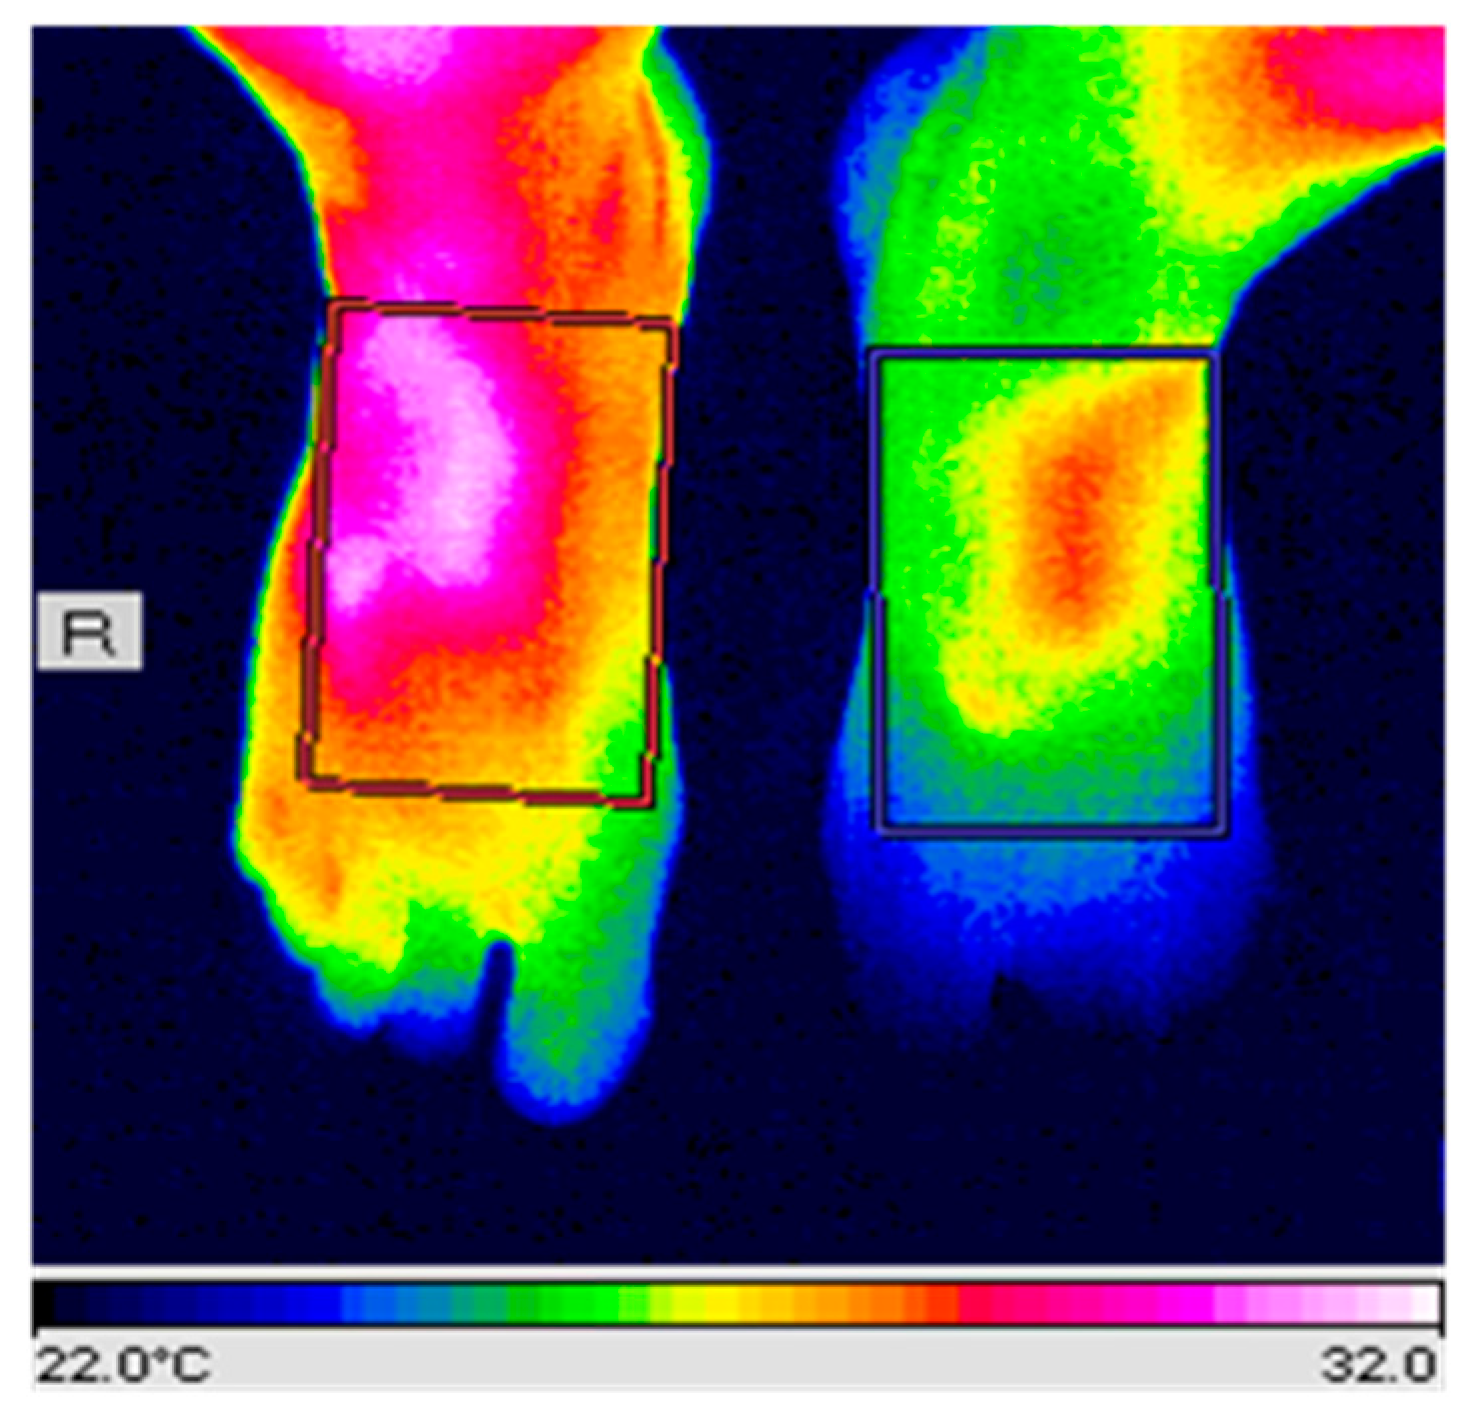 J. Imaging | Free Full-Text | The Herschel Heritage to Medical Thermography  | HTML